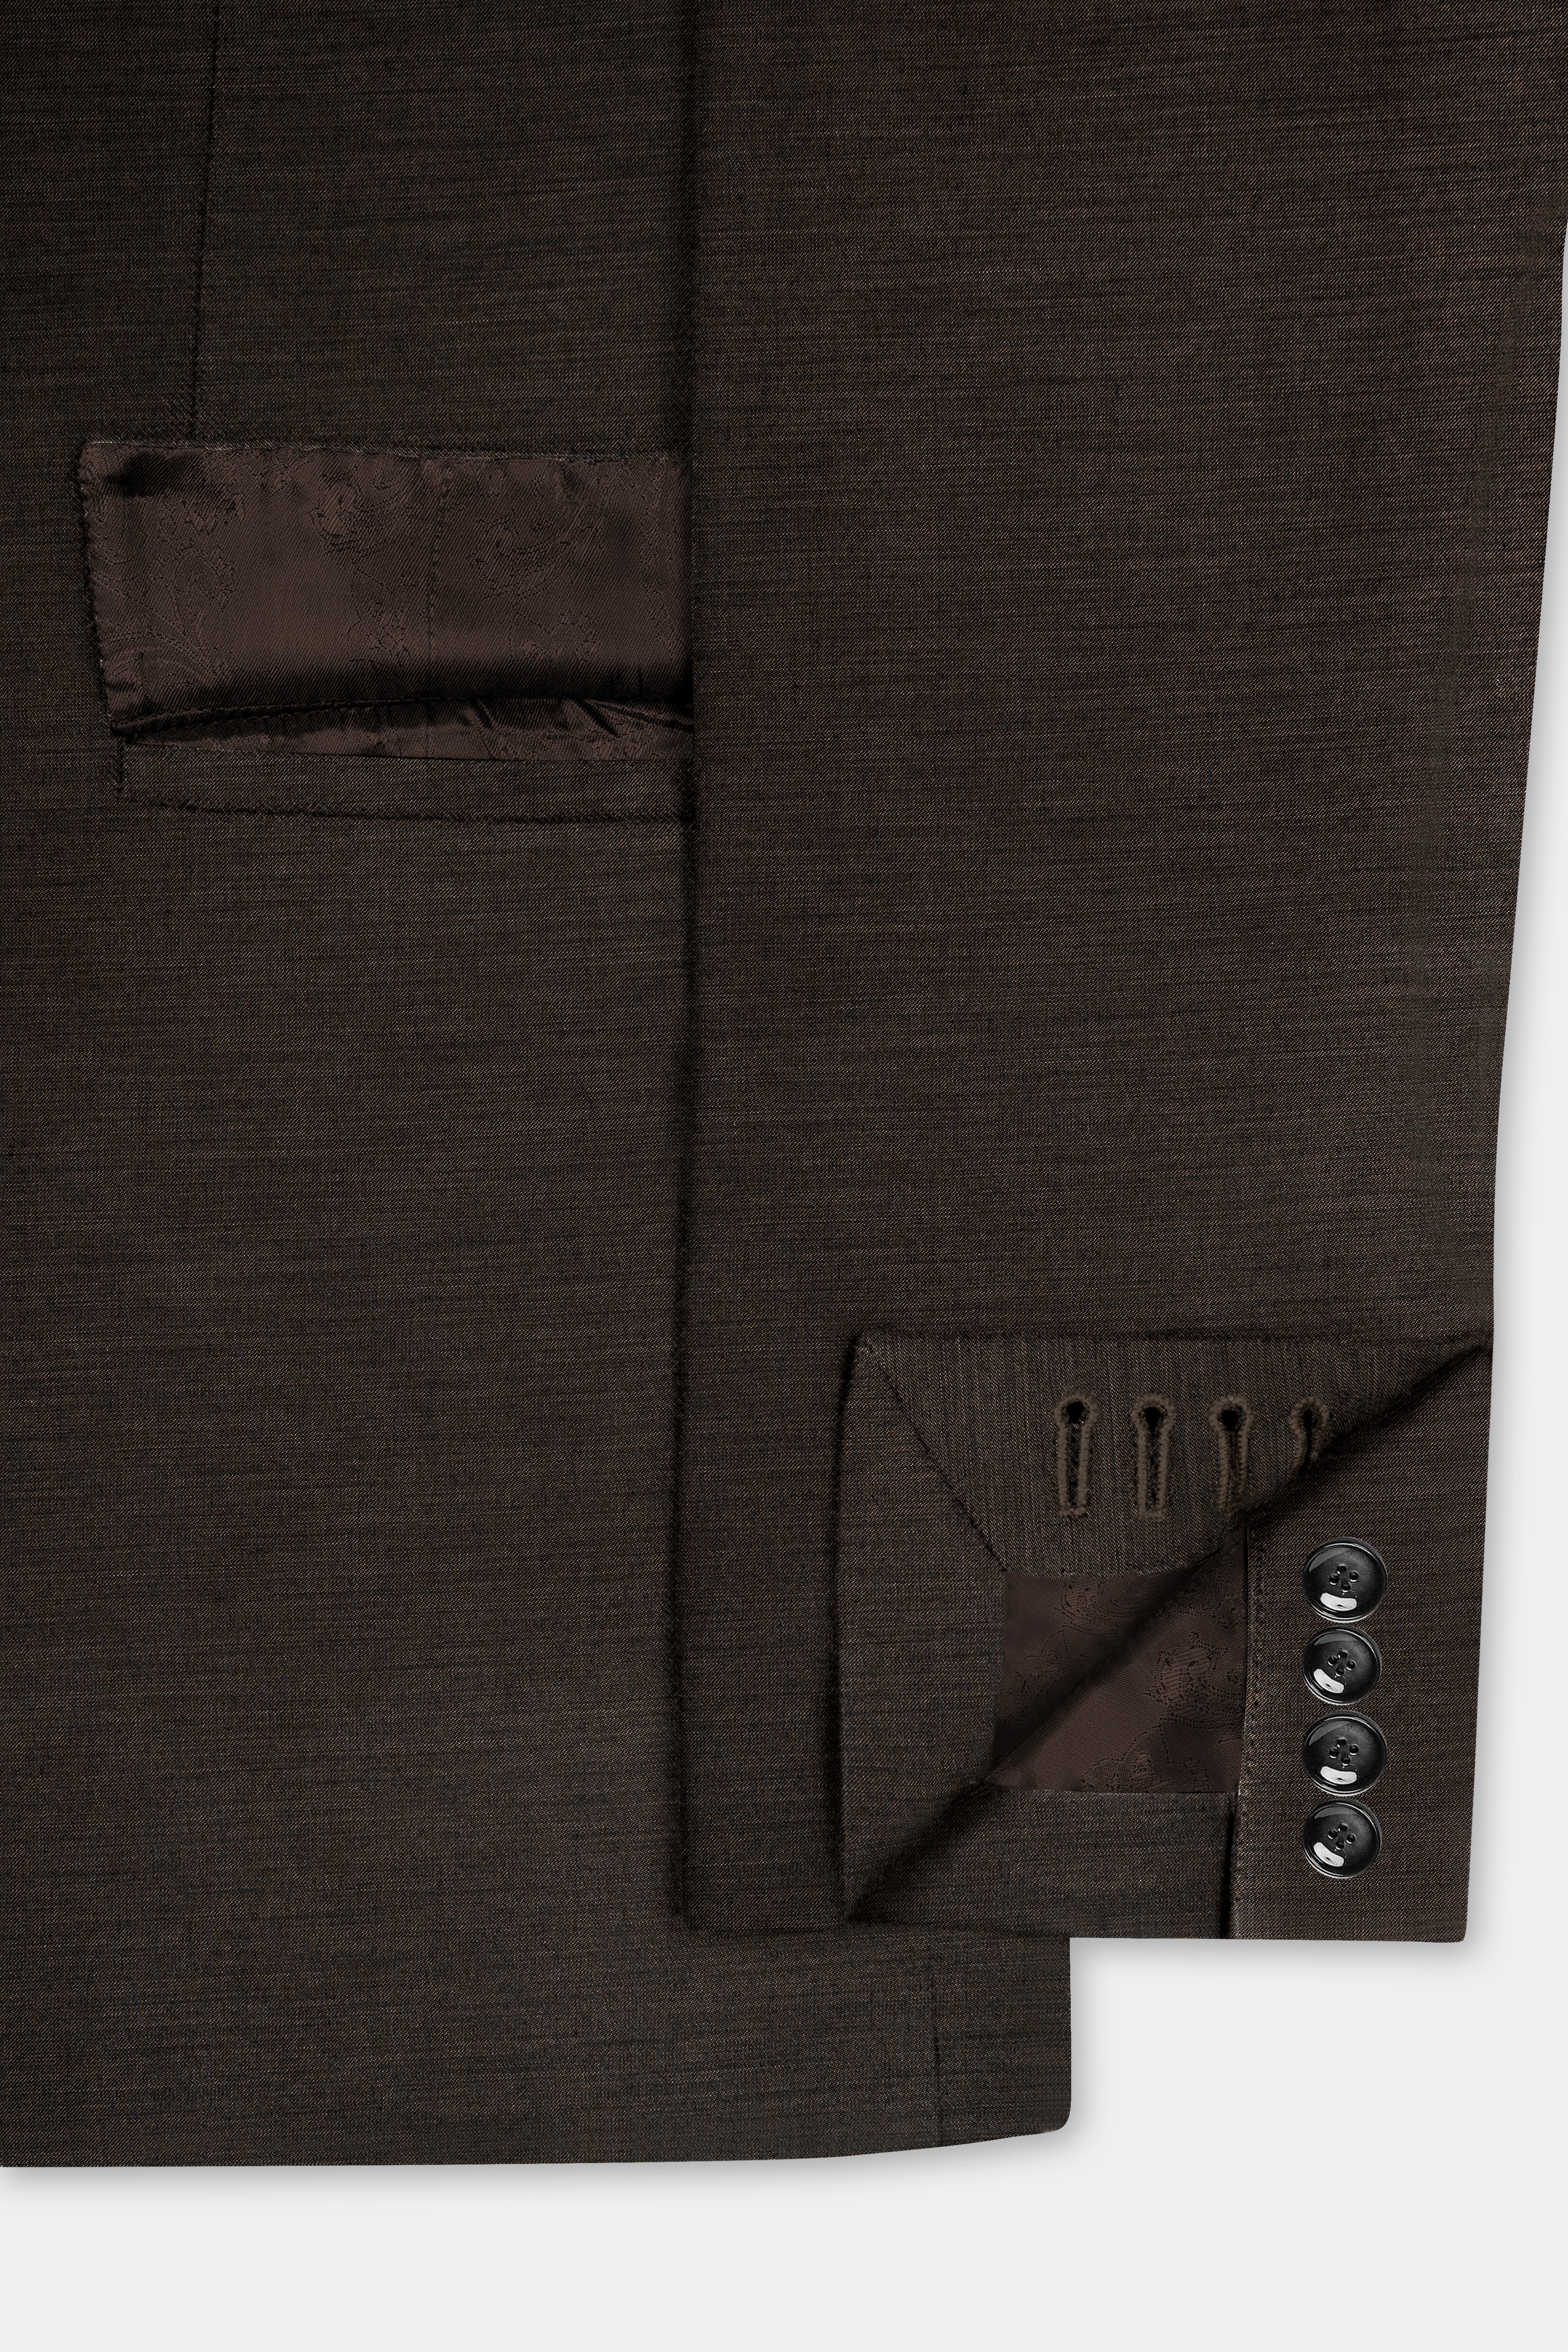 Eclipse Brown Textured Wool Blend Double Breasted Suit